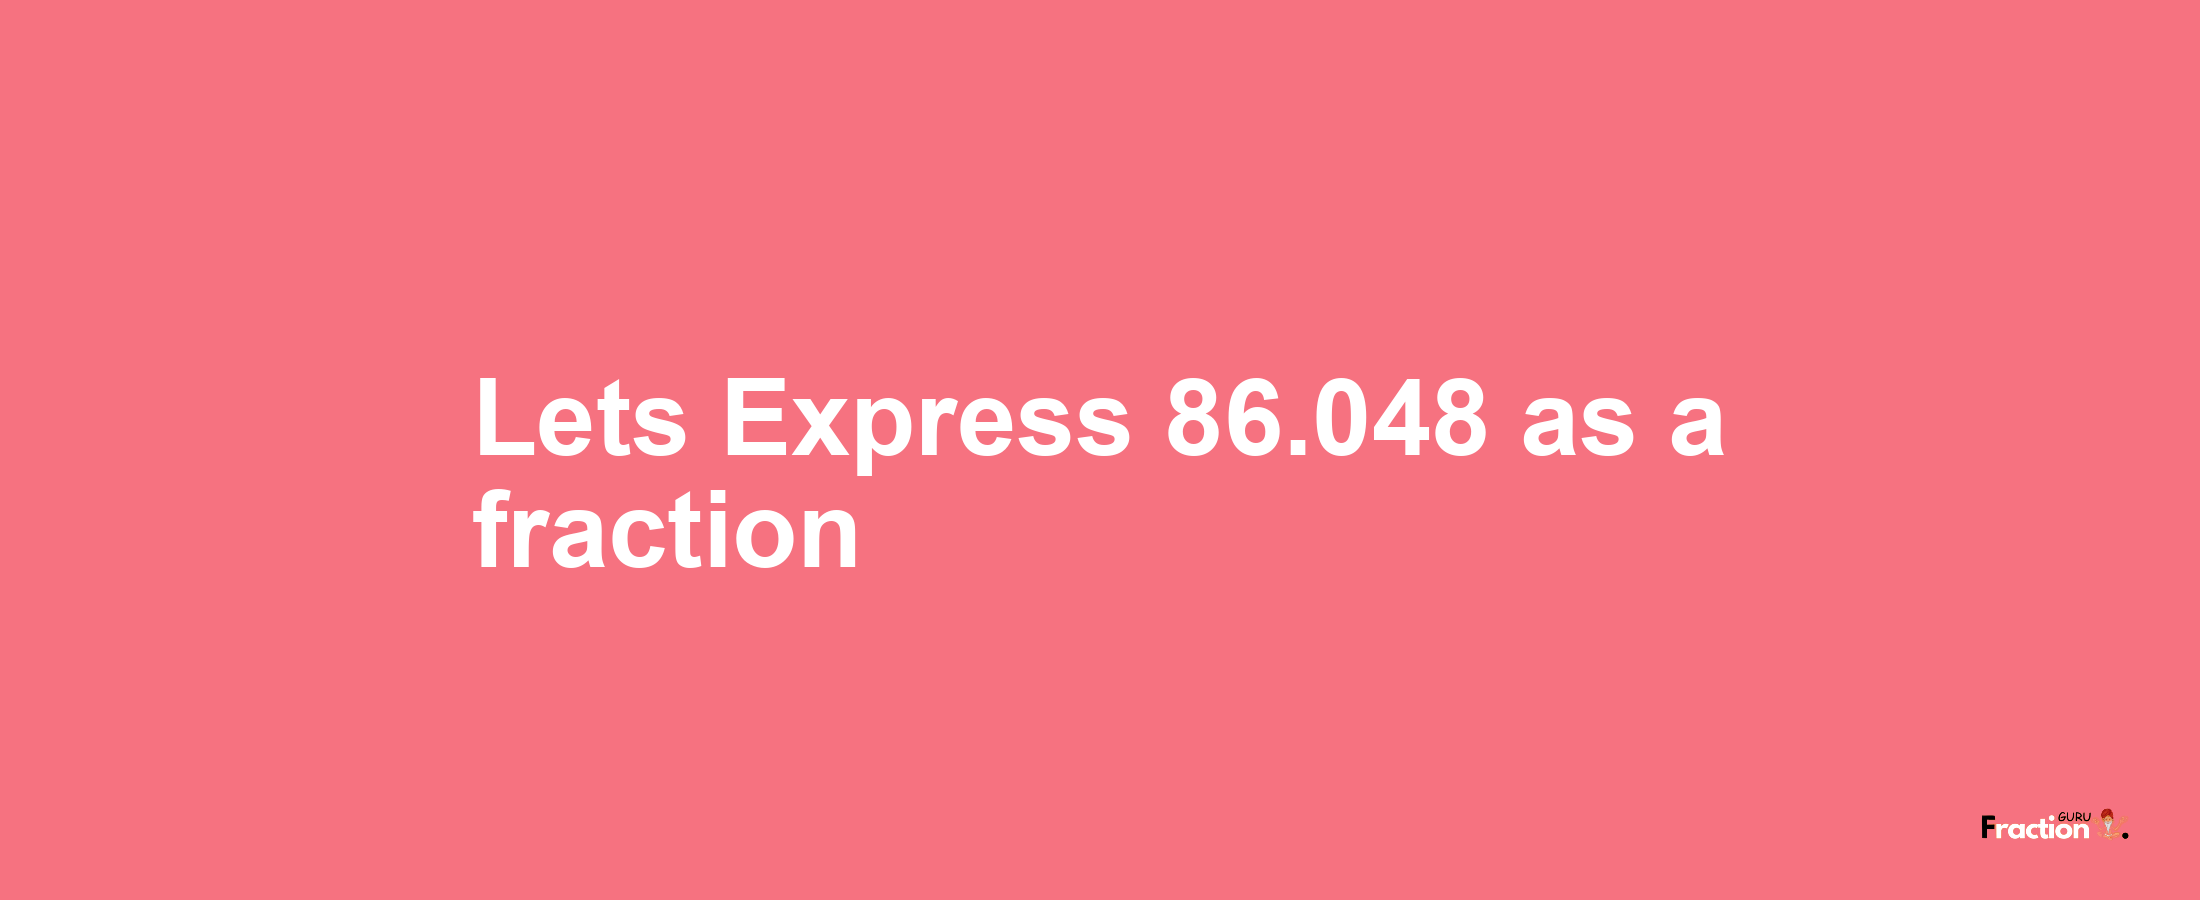 Lets Express 86.048 as afraction